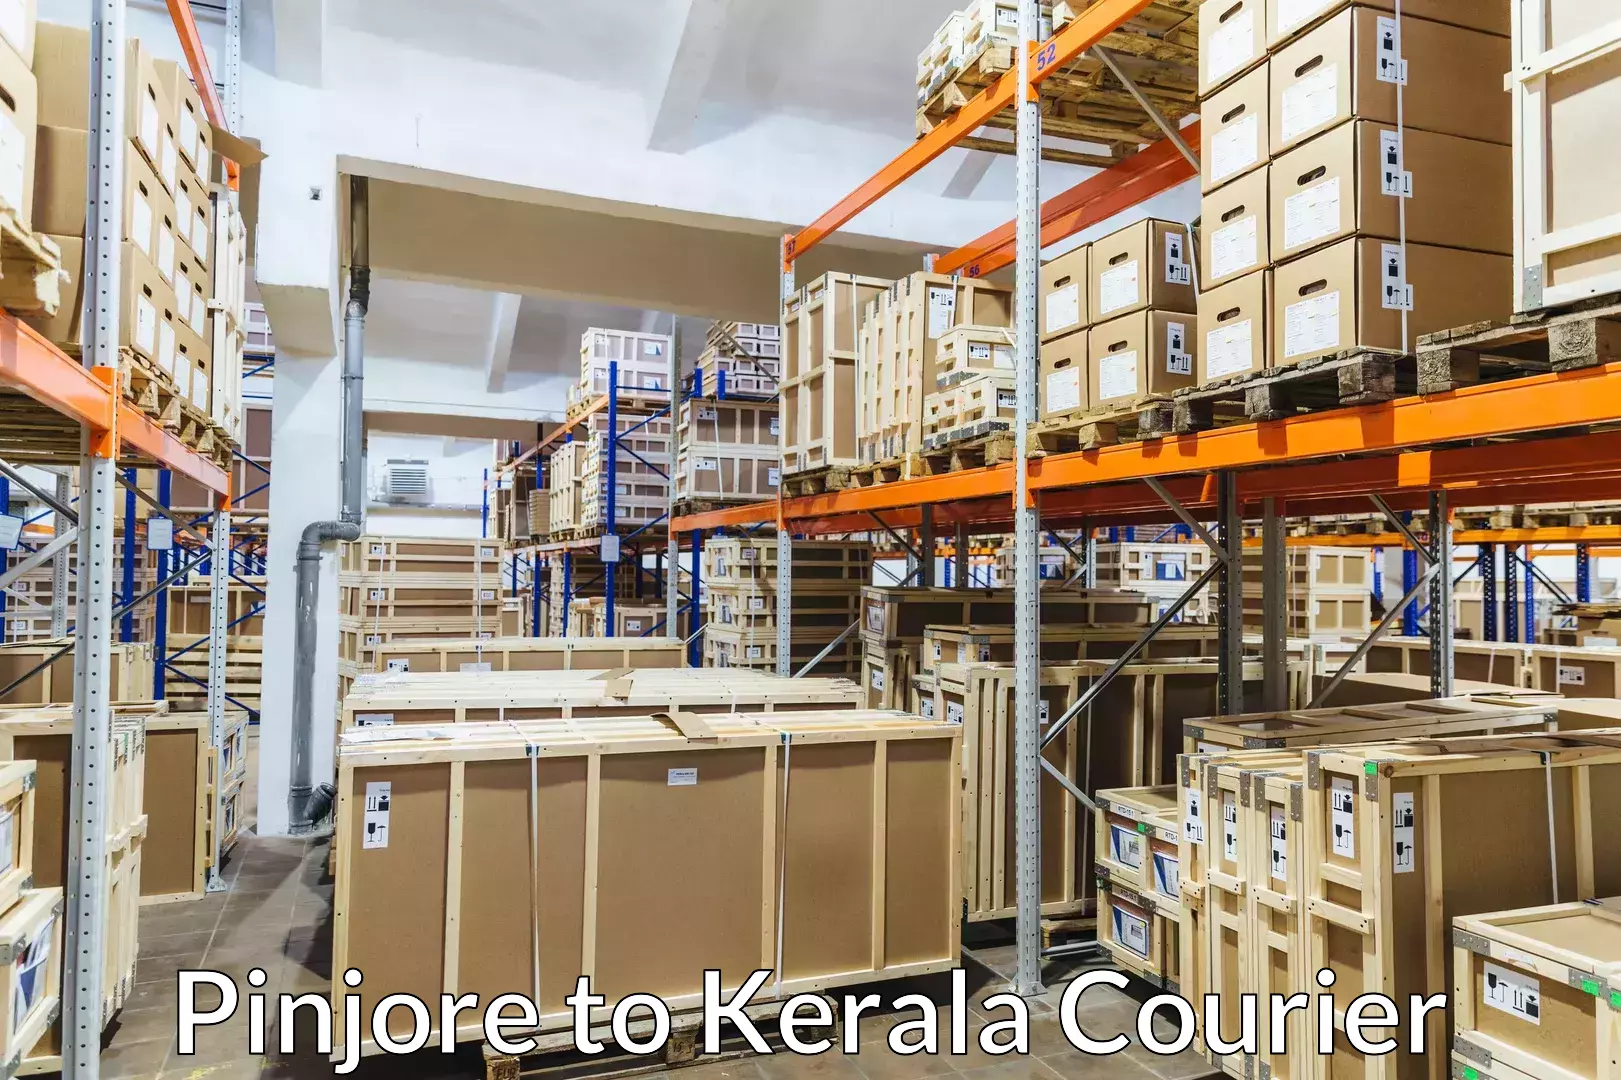 Baggage relocation service Pinjore to Kerala